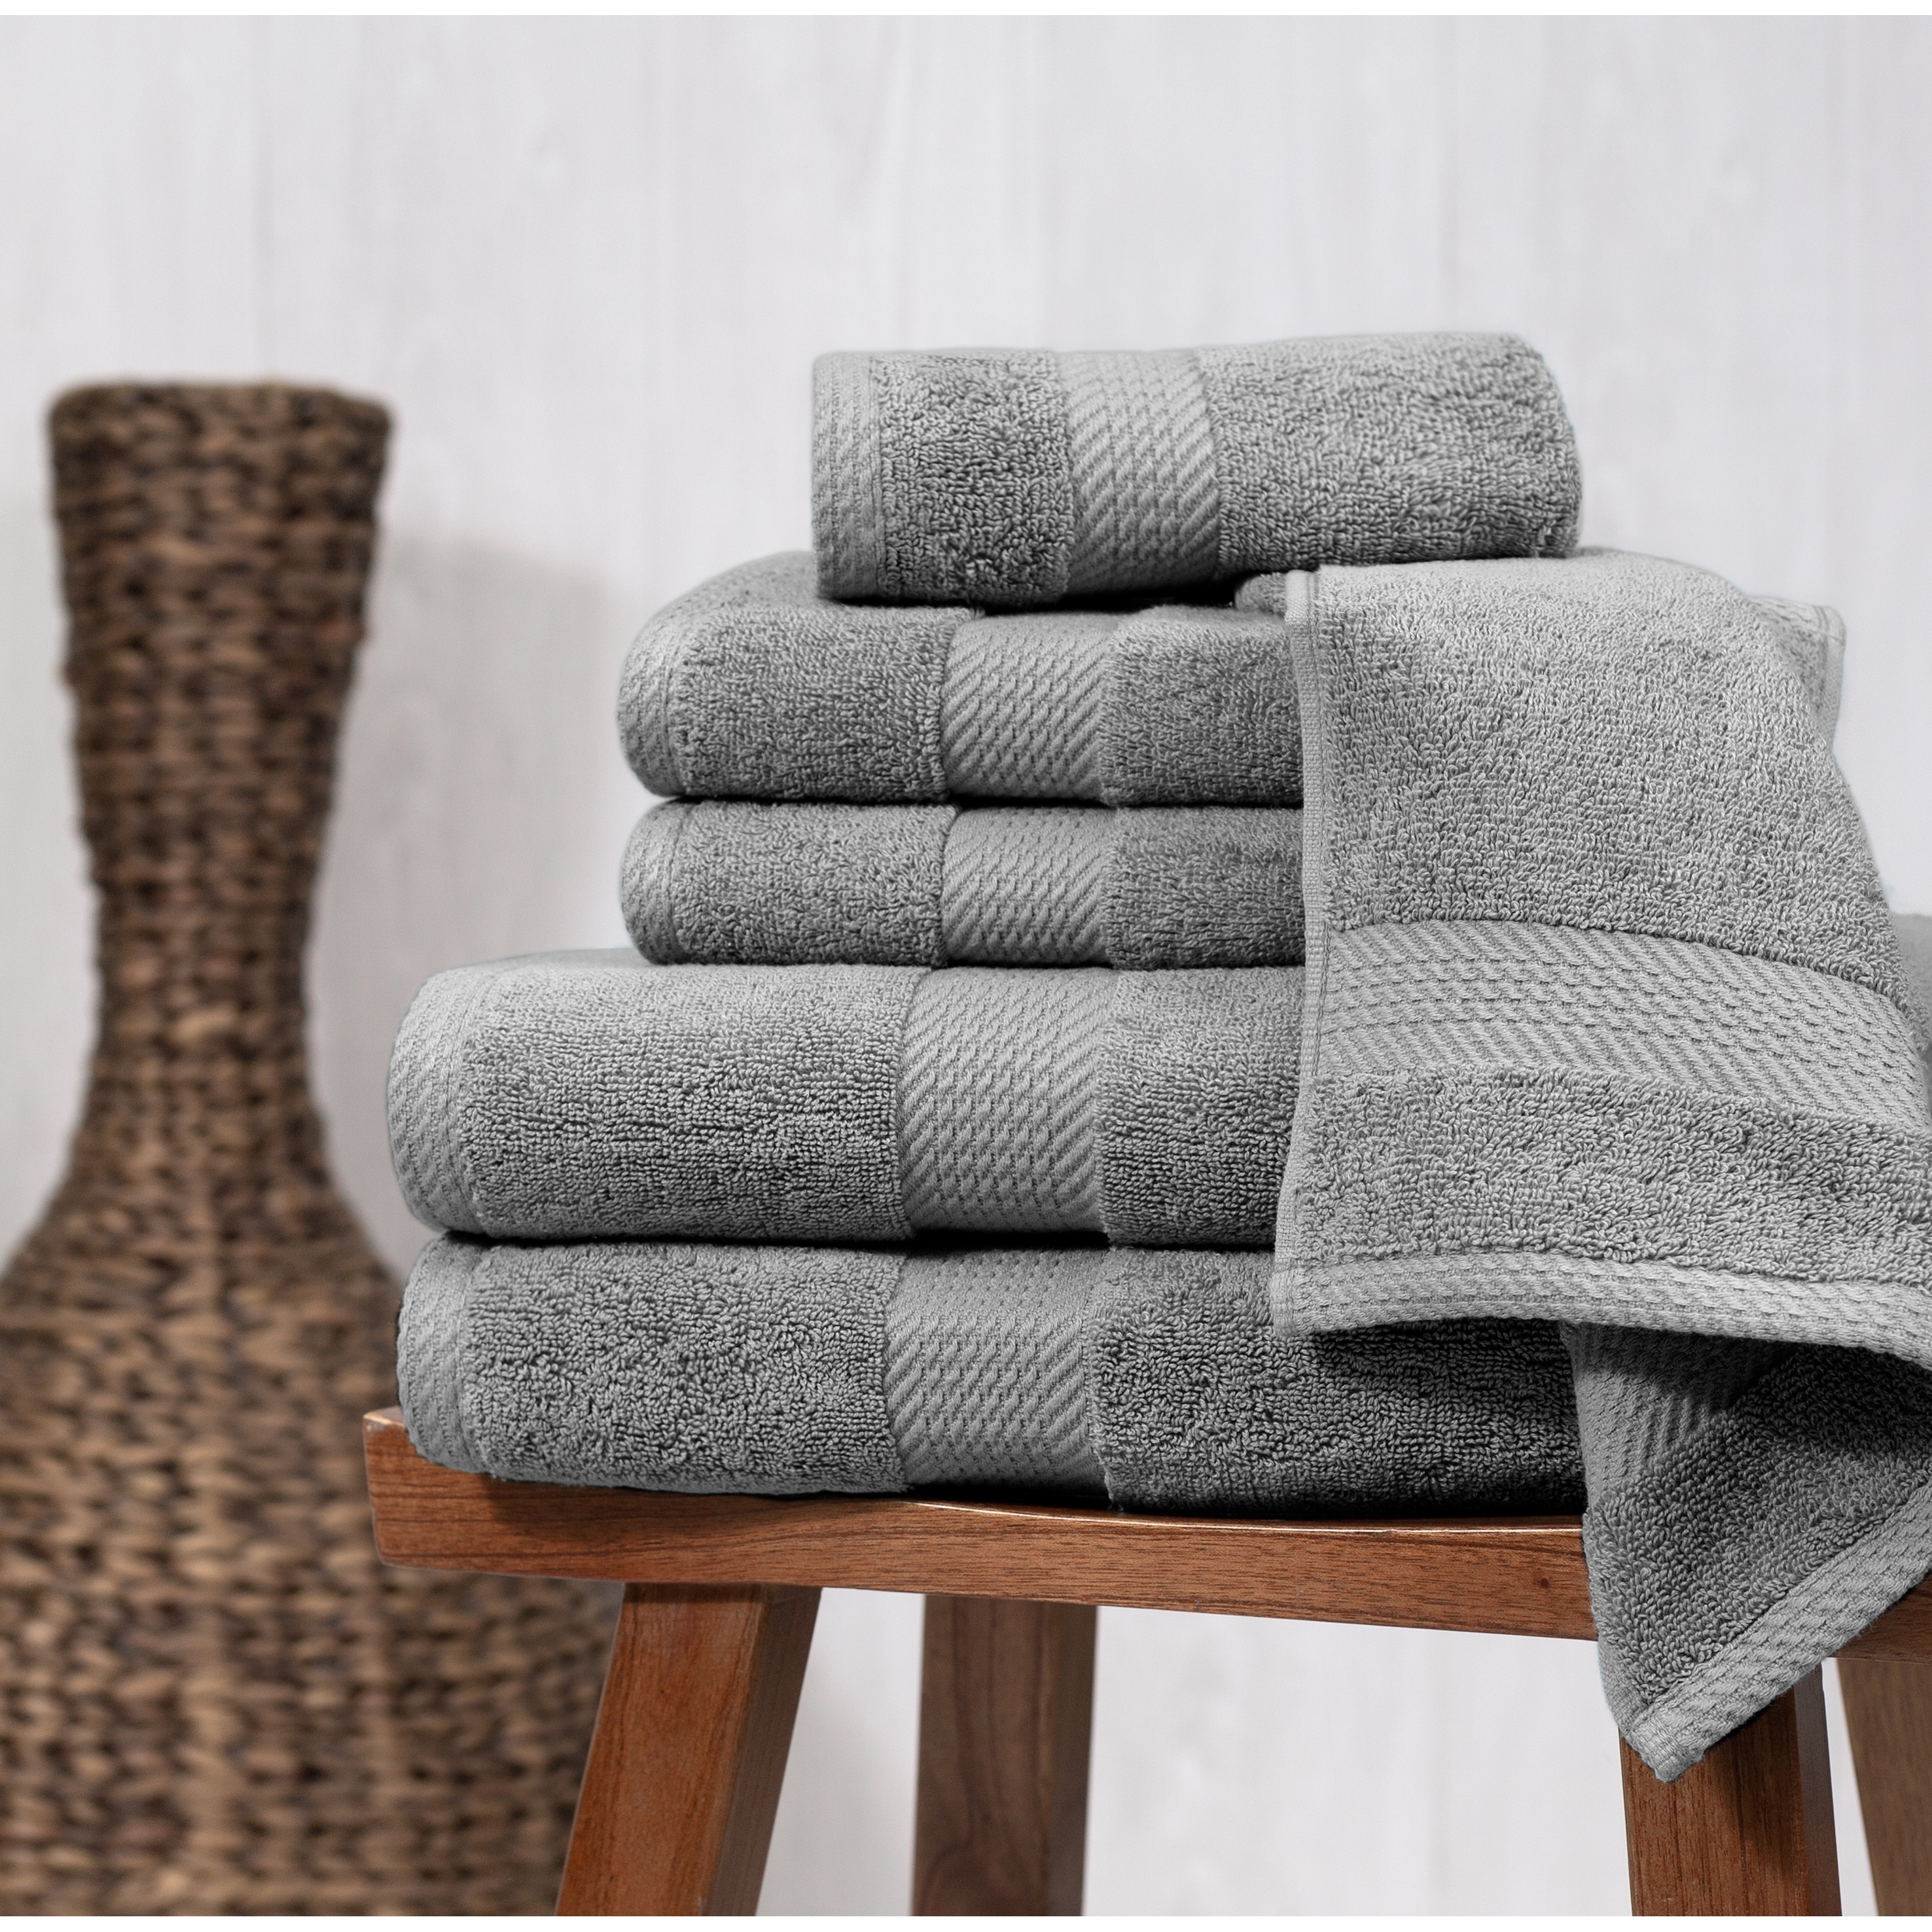 https://ak1.ostkcdn.com/images/products/is/images/direct/aeabc647d5634031564278836f0f35682b65efe0/Central-Park-Studios-Cheswick-6-Piece-Bath-Towel-Set-in-Turquoise.jpg